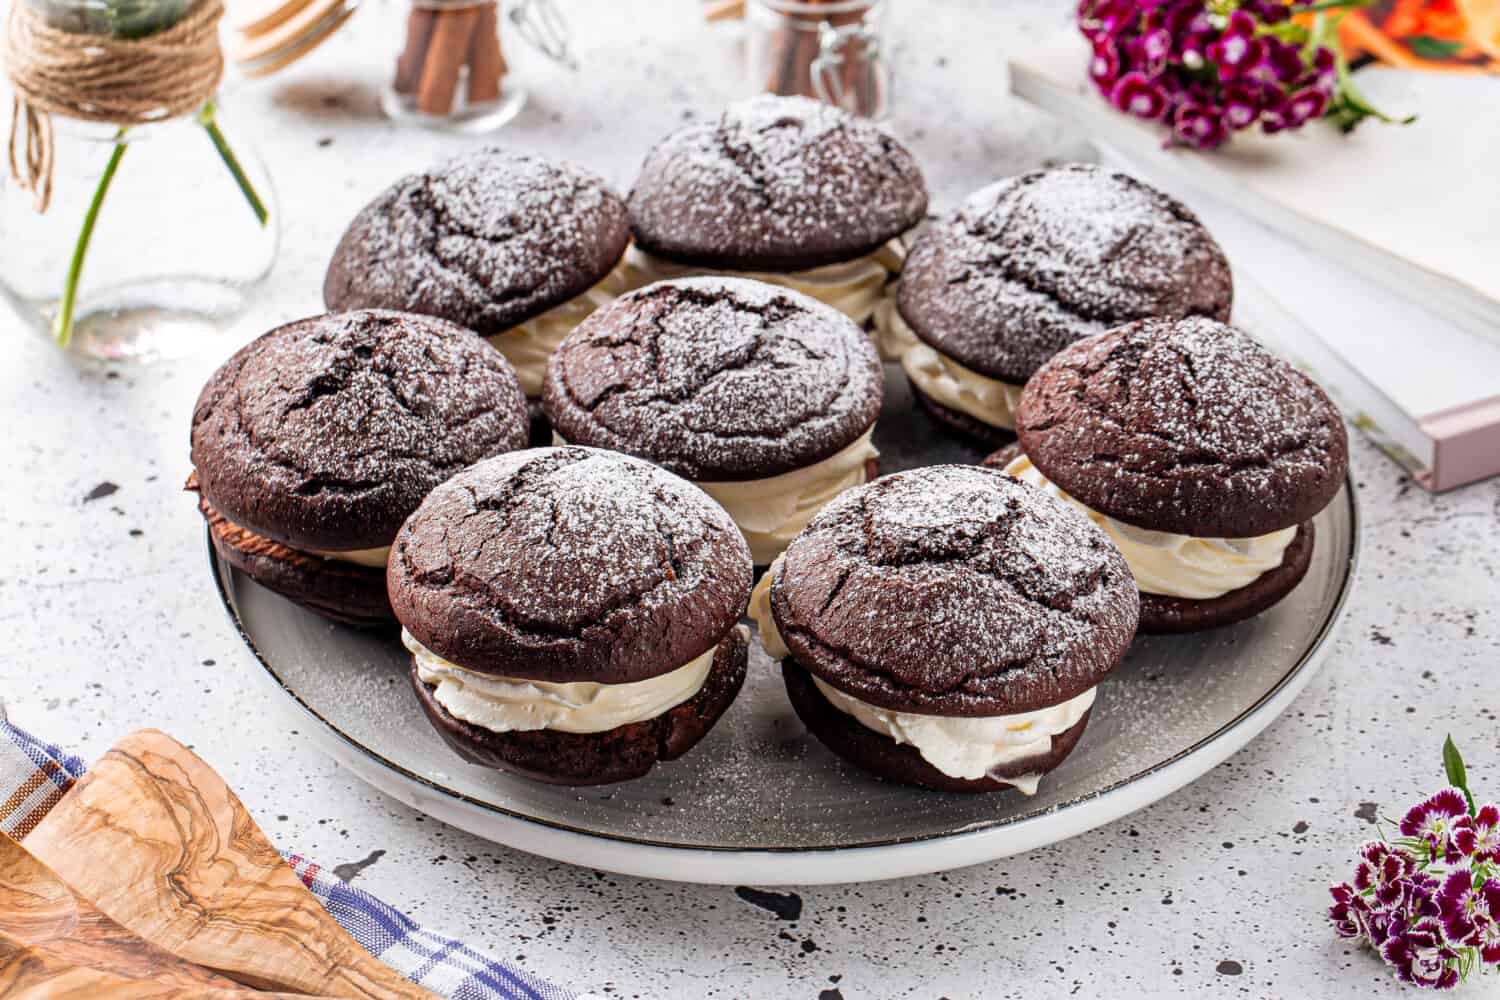 Fresh baked american chocolate whoopie pies with cream filling